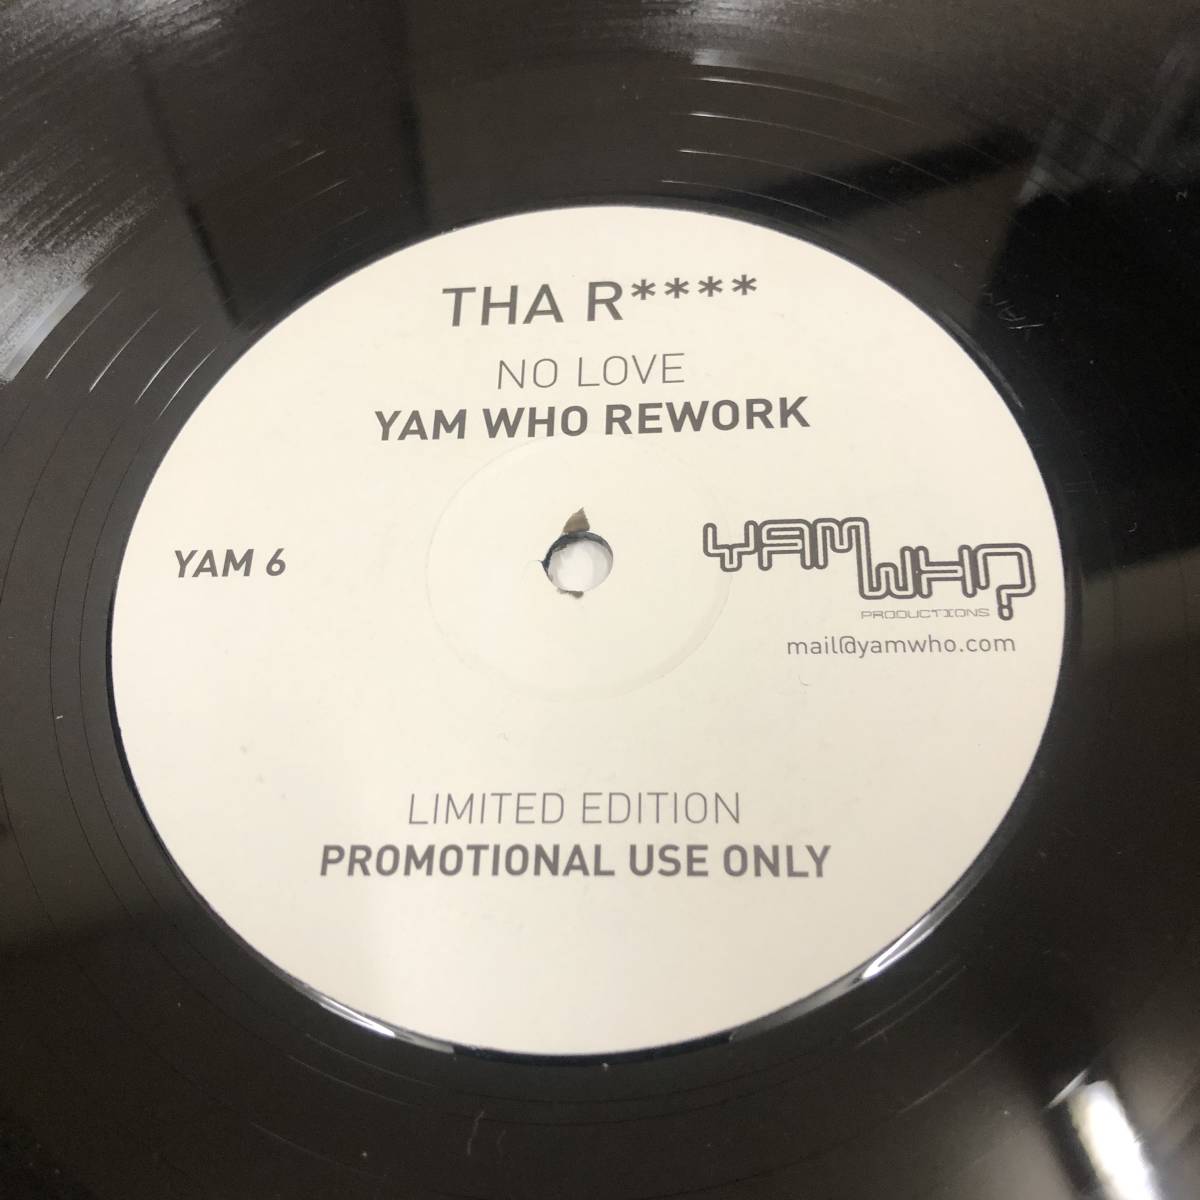 Tha R***** - Didn't You Know? (Yam Who Rework) (A13)の画像1